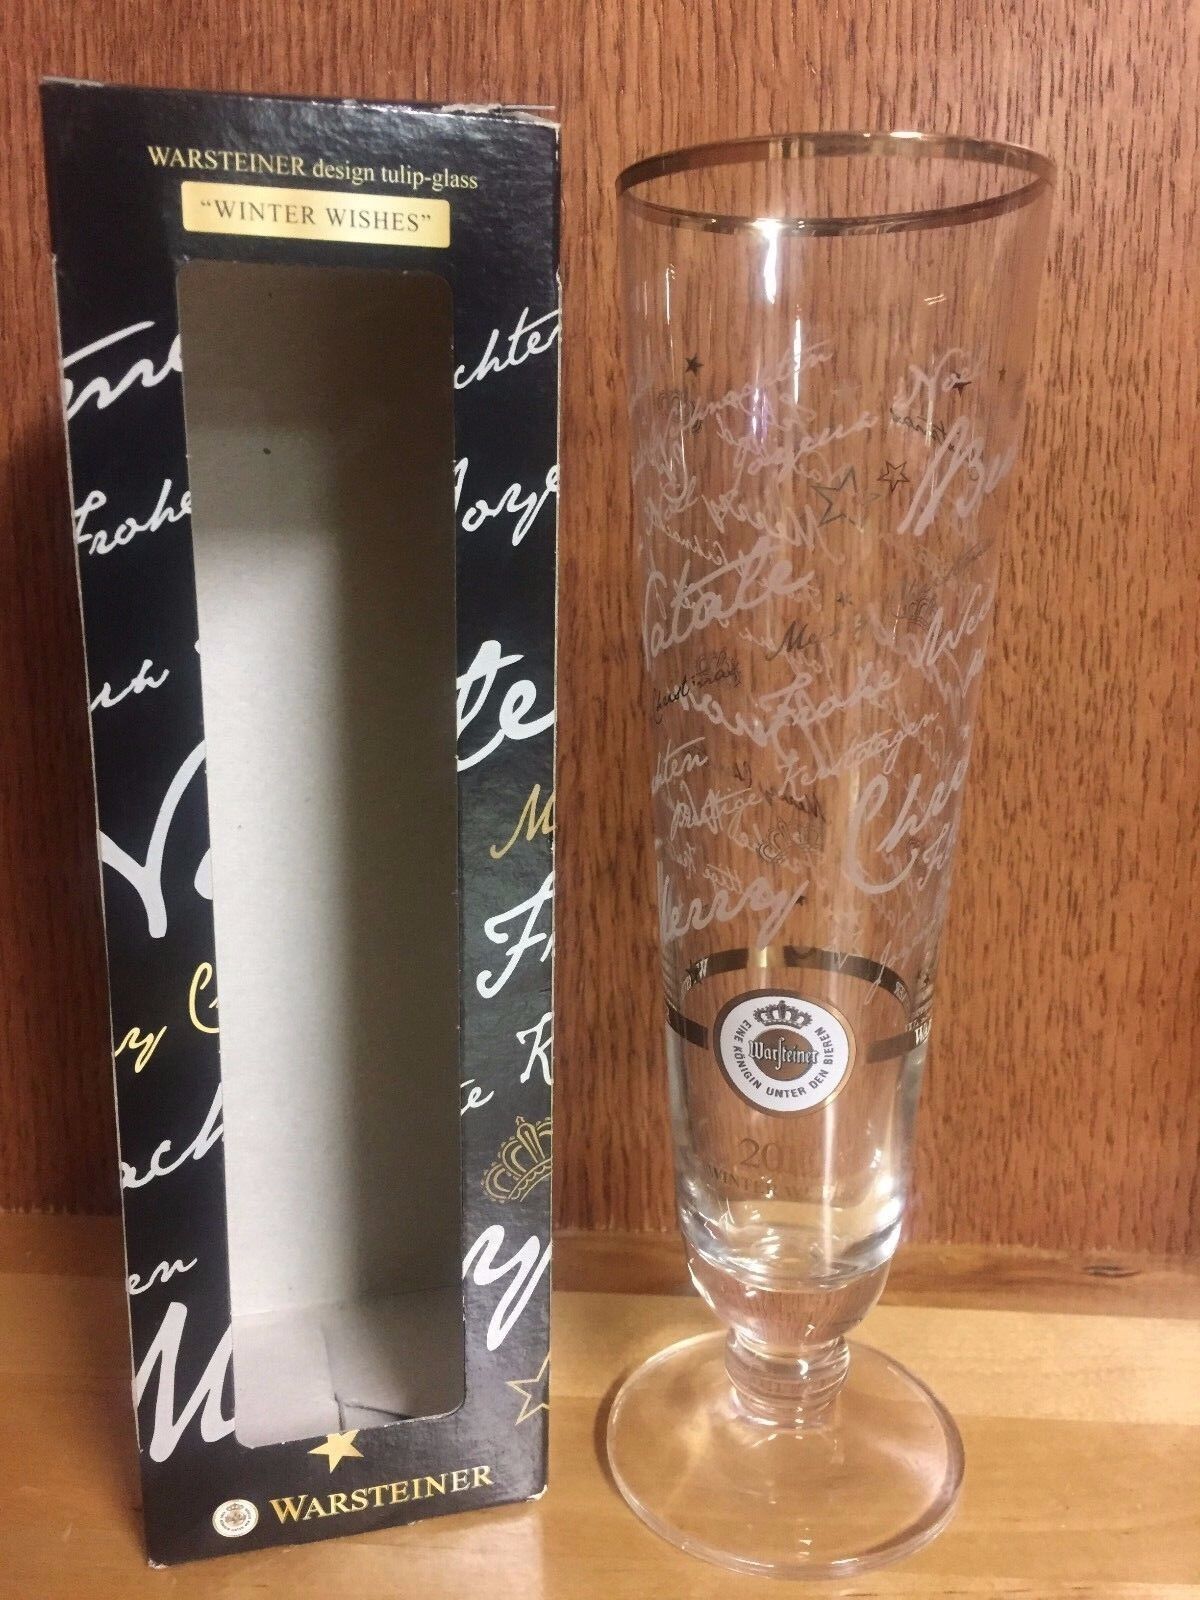 *NEW in BOX* Limited Edition Warsteiner Beer Tulip/Pilsner Glass - Winter Wishes